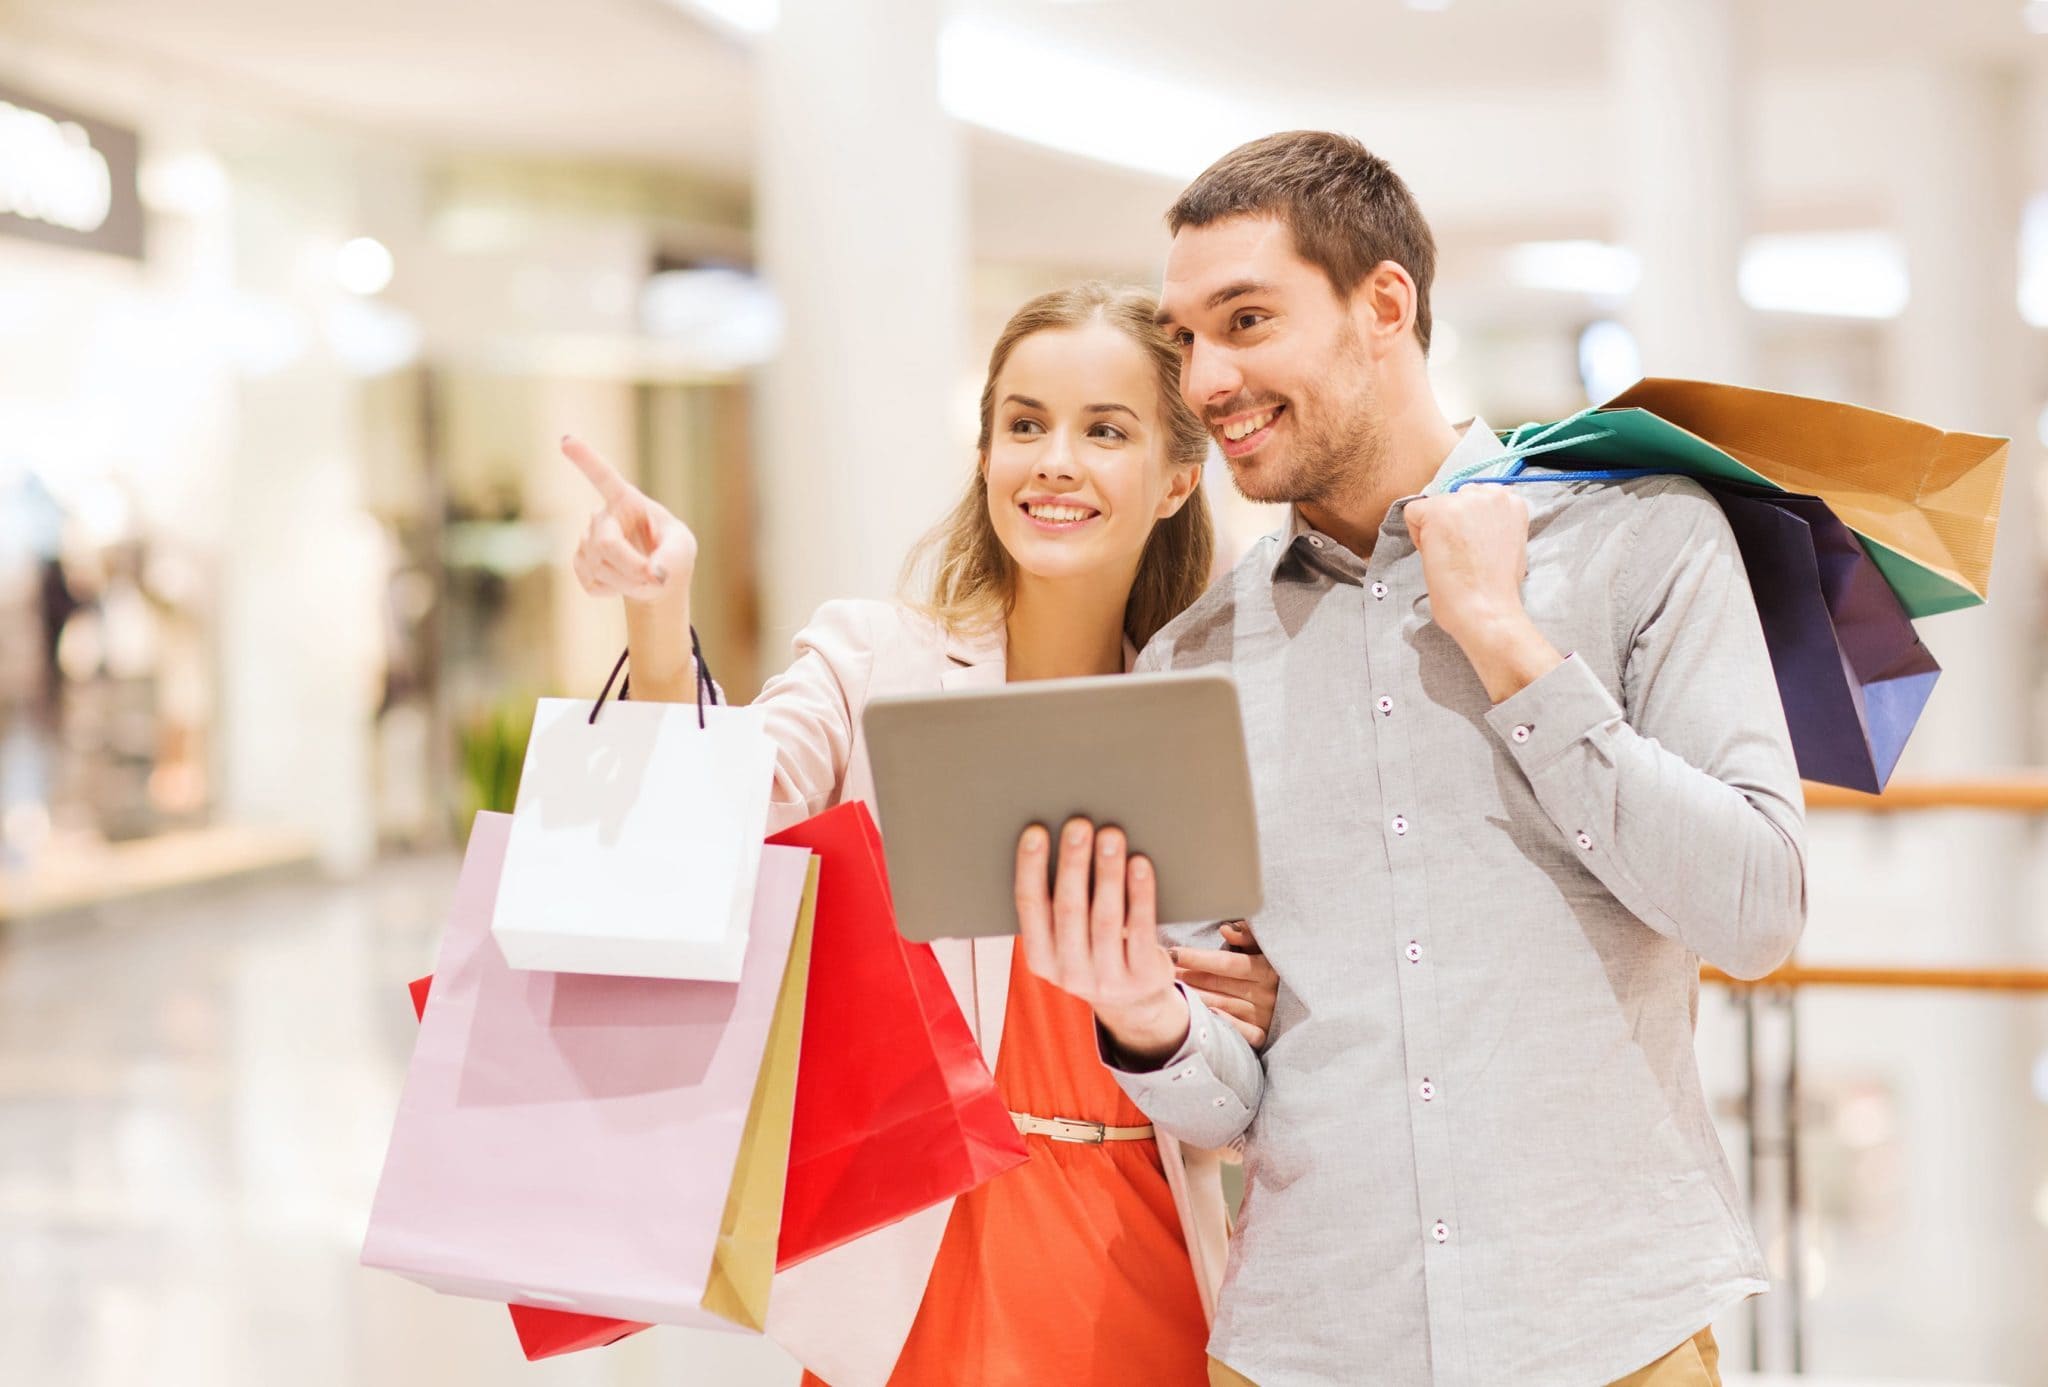 Retail Dynamics: Deliver a complete shopping experience: Here’s how